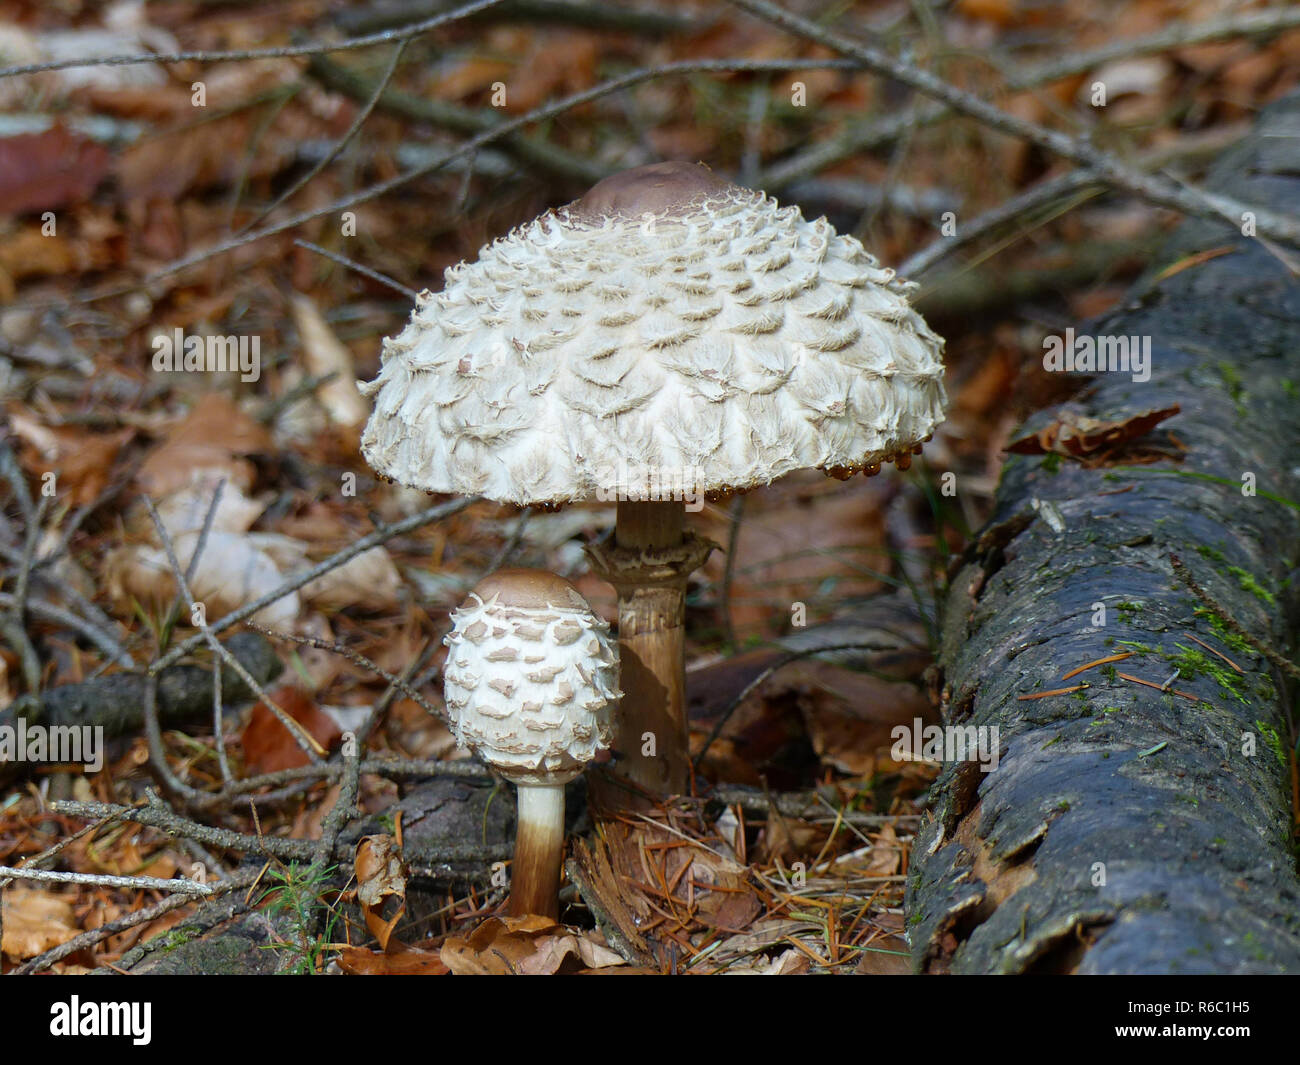 Palatinate Forest, Saffron Parasol Mushrooms, Macrolepiota Rachodes, Symbol Young And Old Together Stock Photo